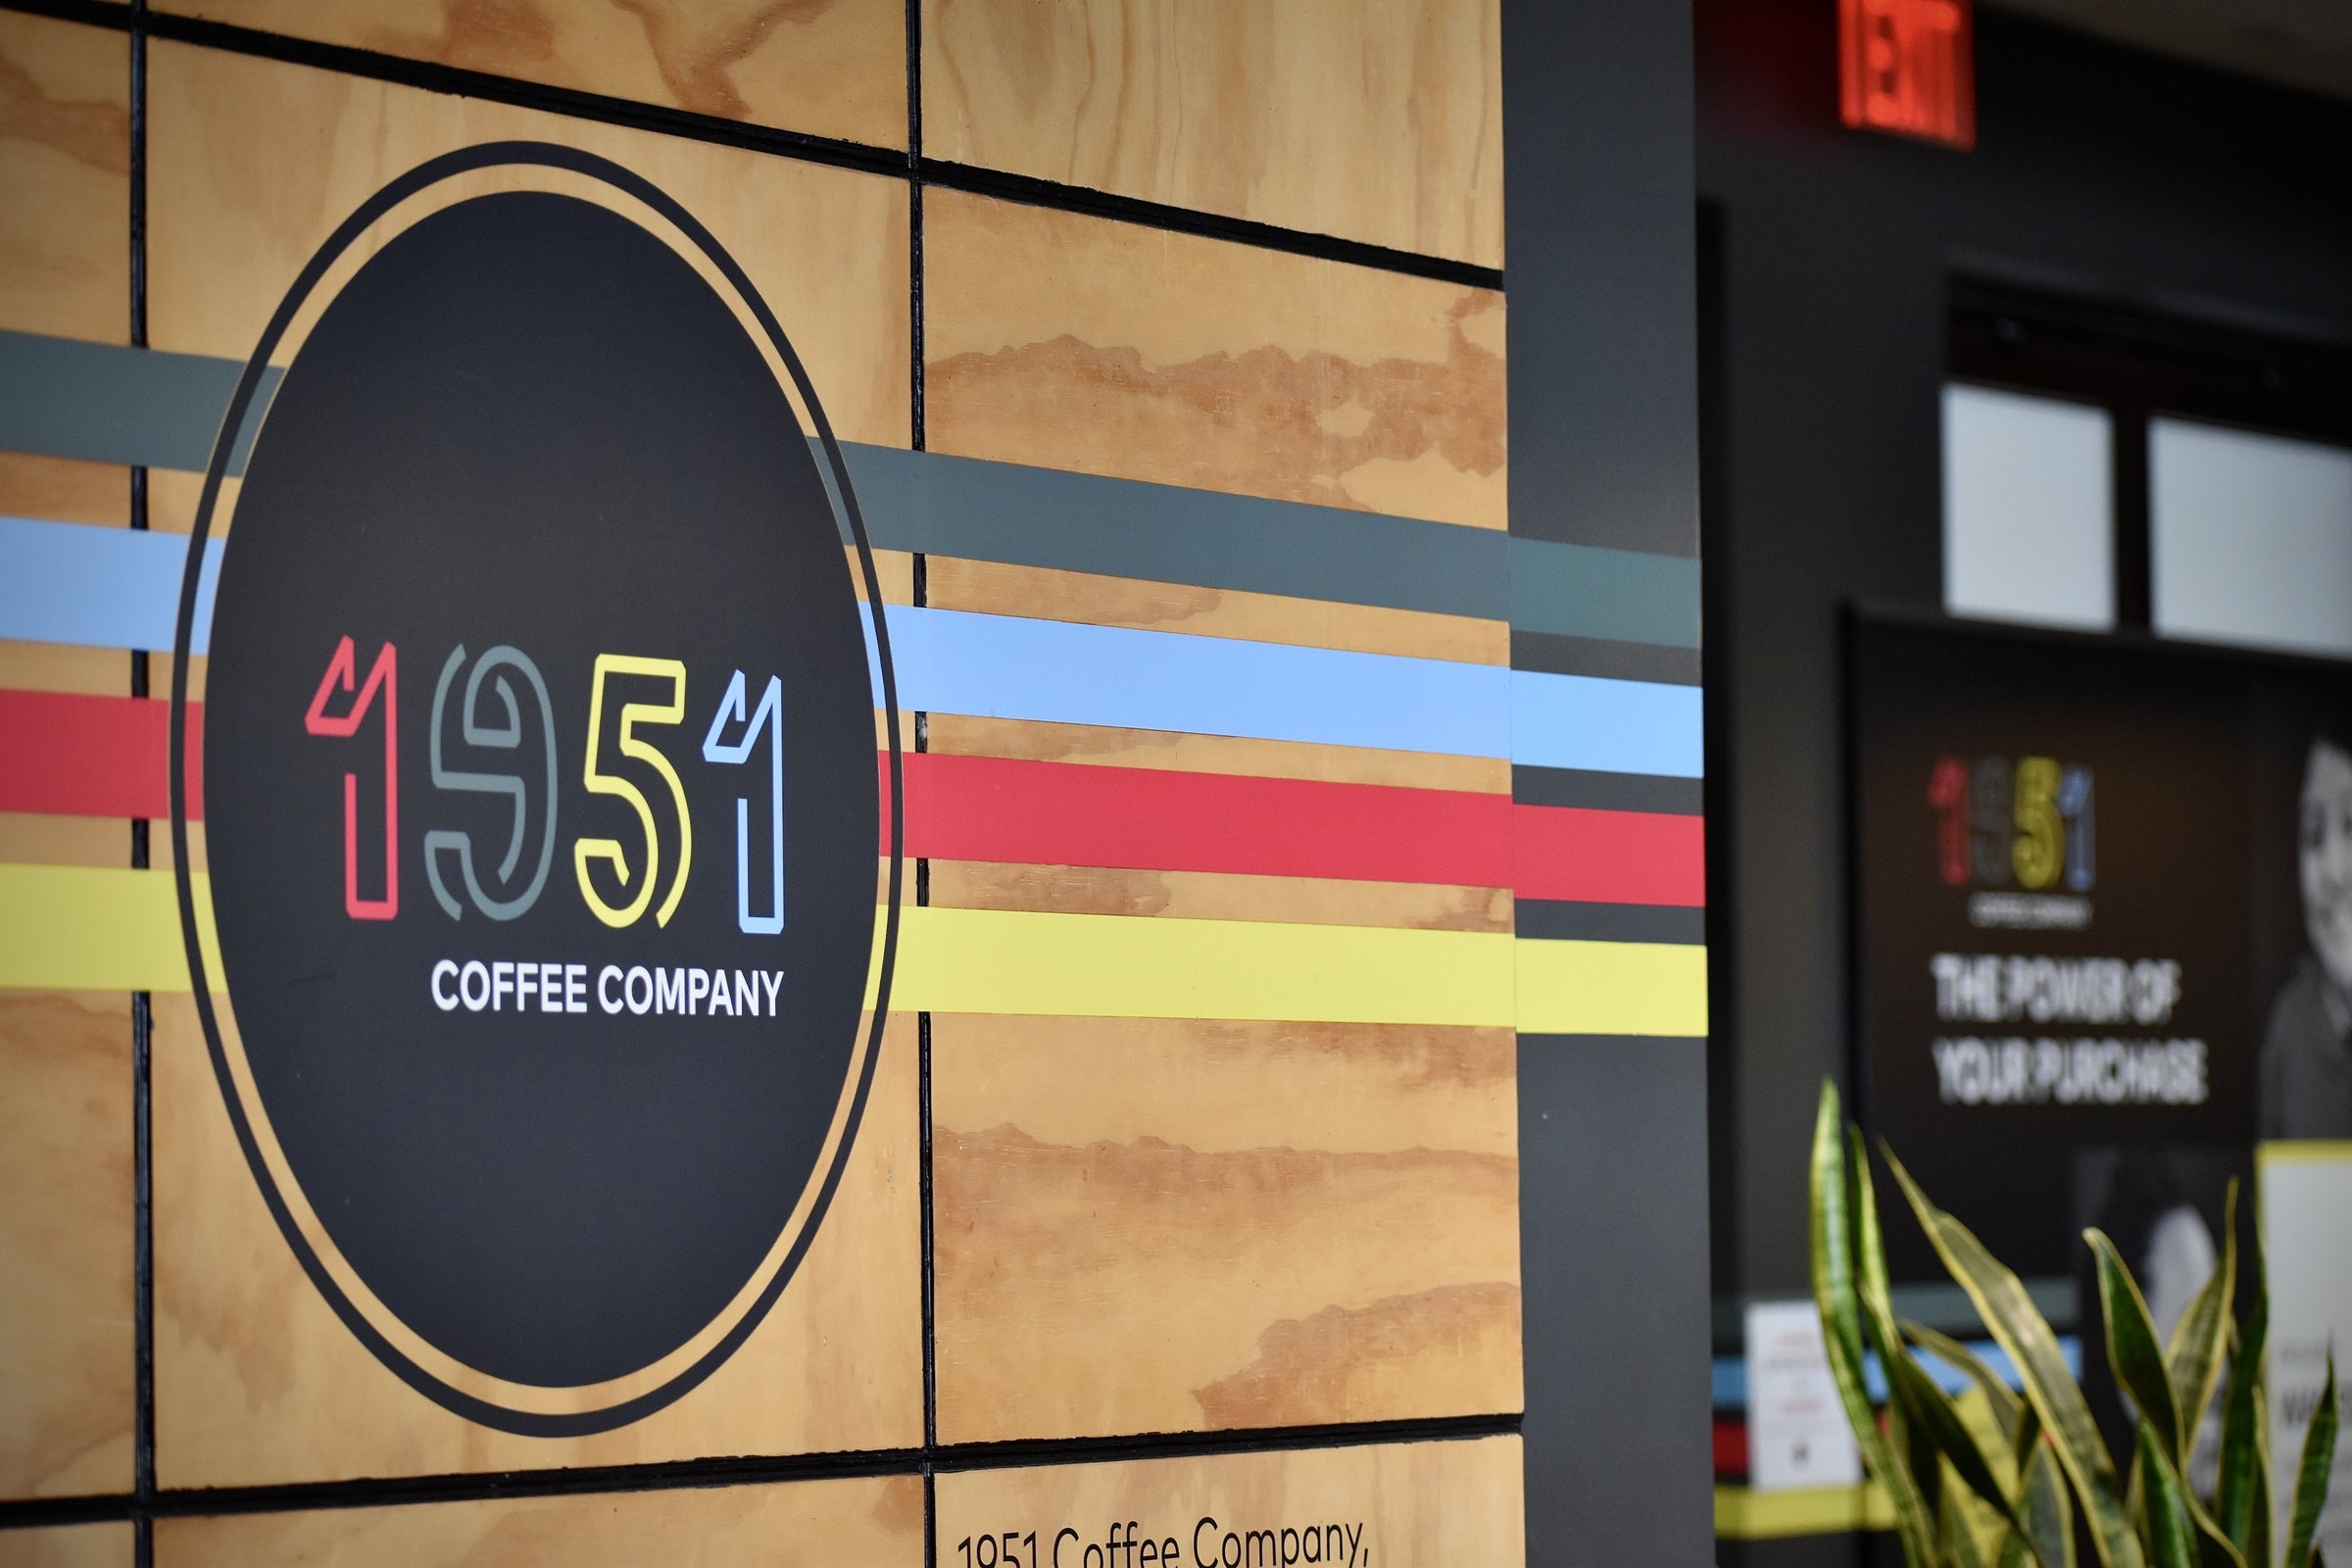 1951 Coffee Logo in Store